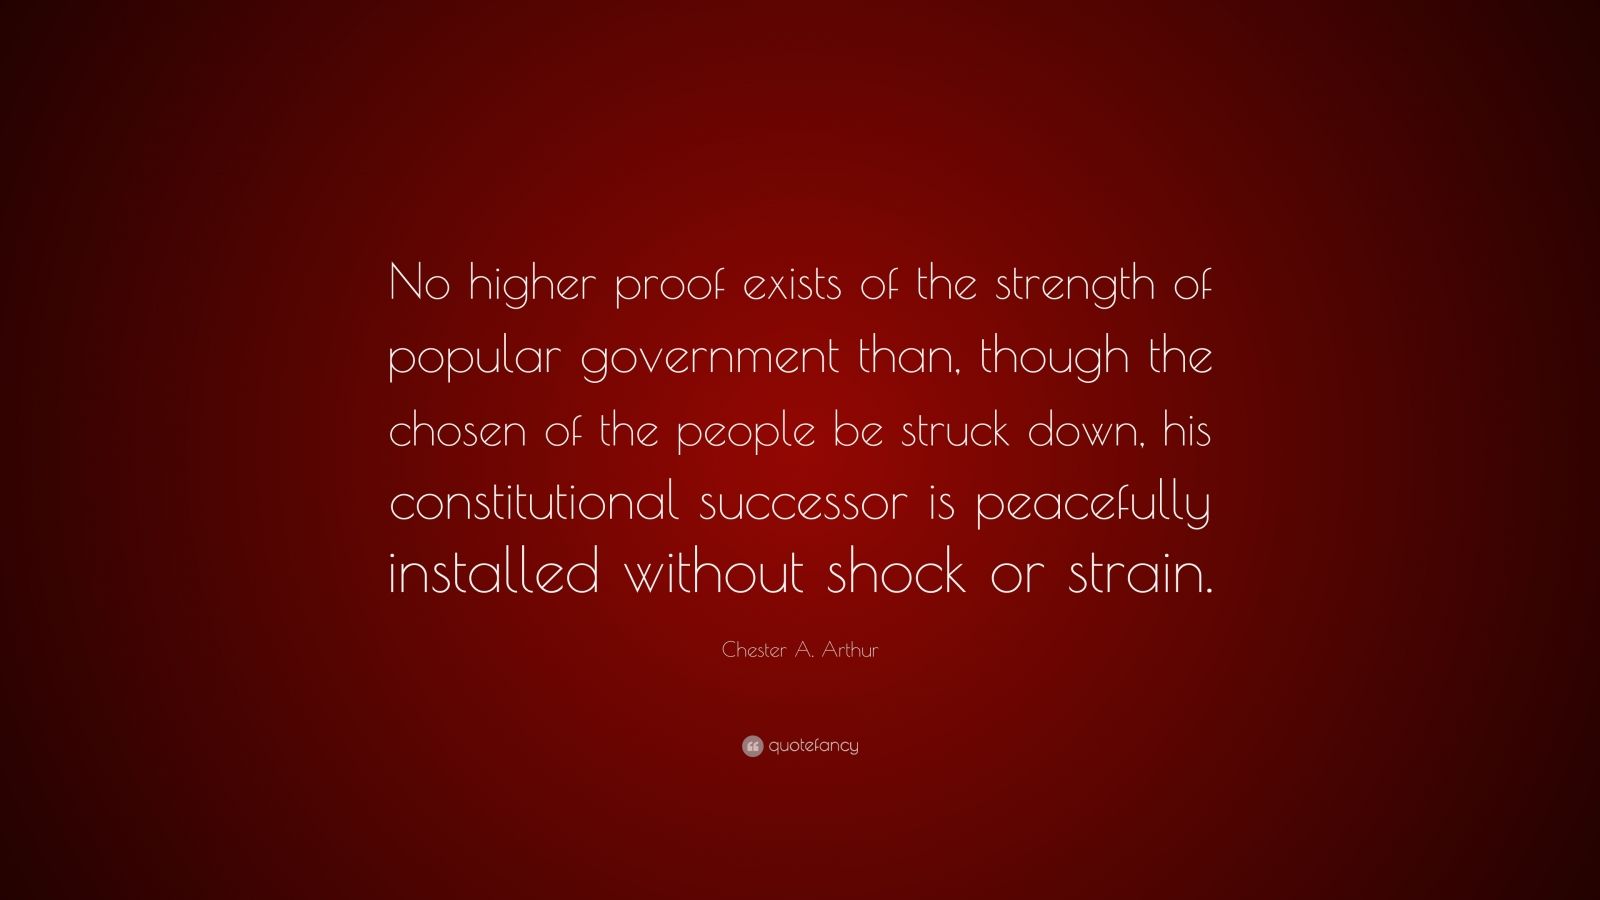 Chester A. Arthur Quote: “No higher proof exists of the strength of